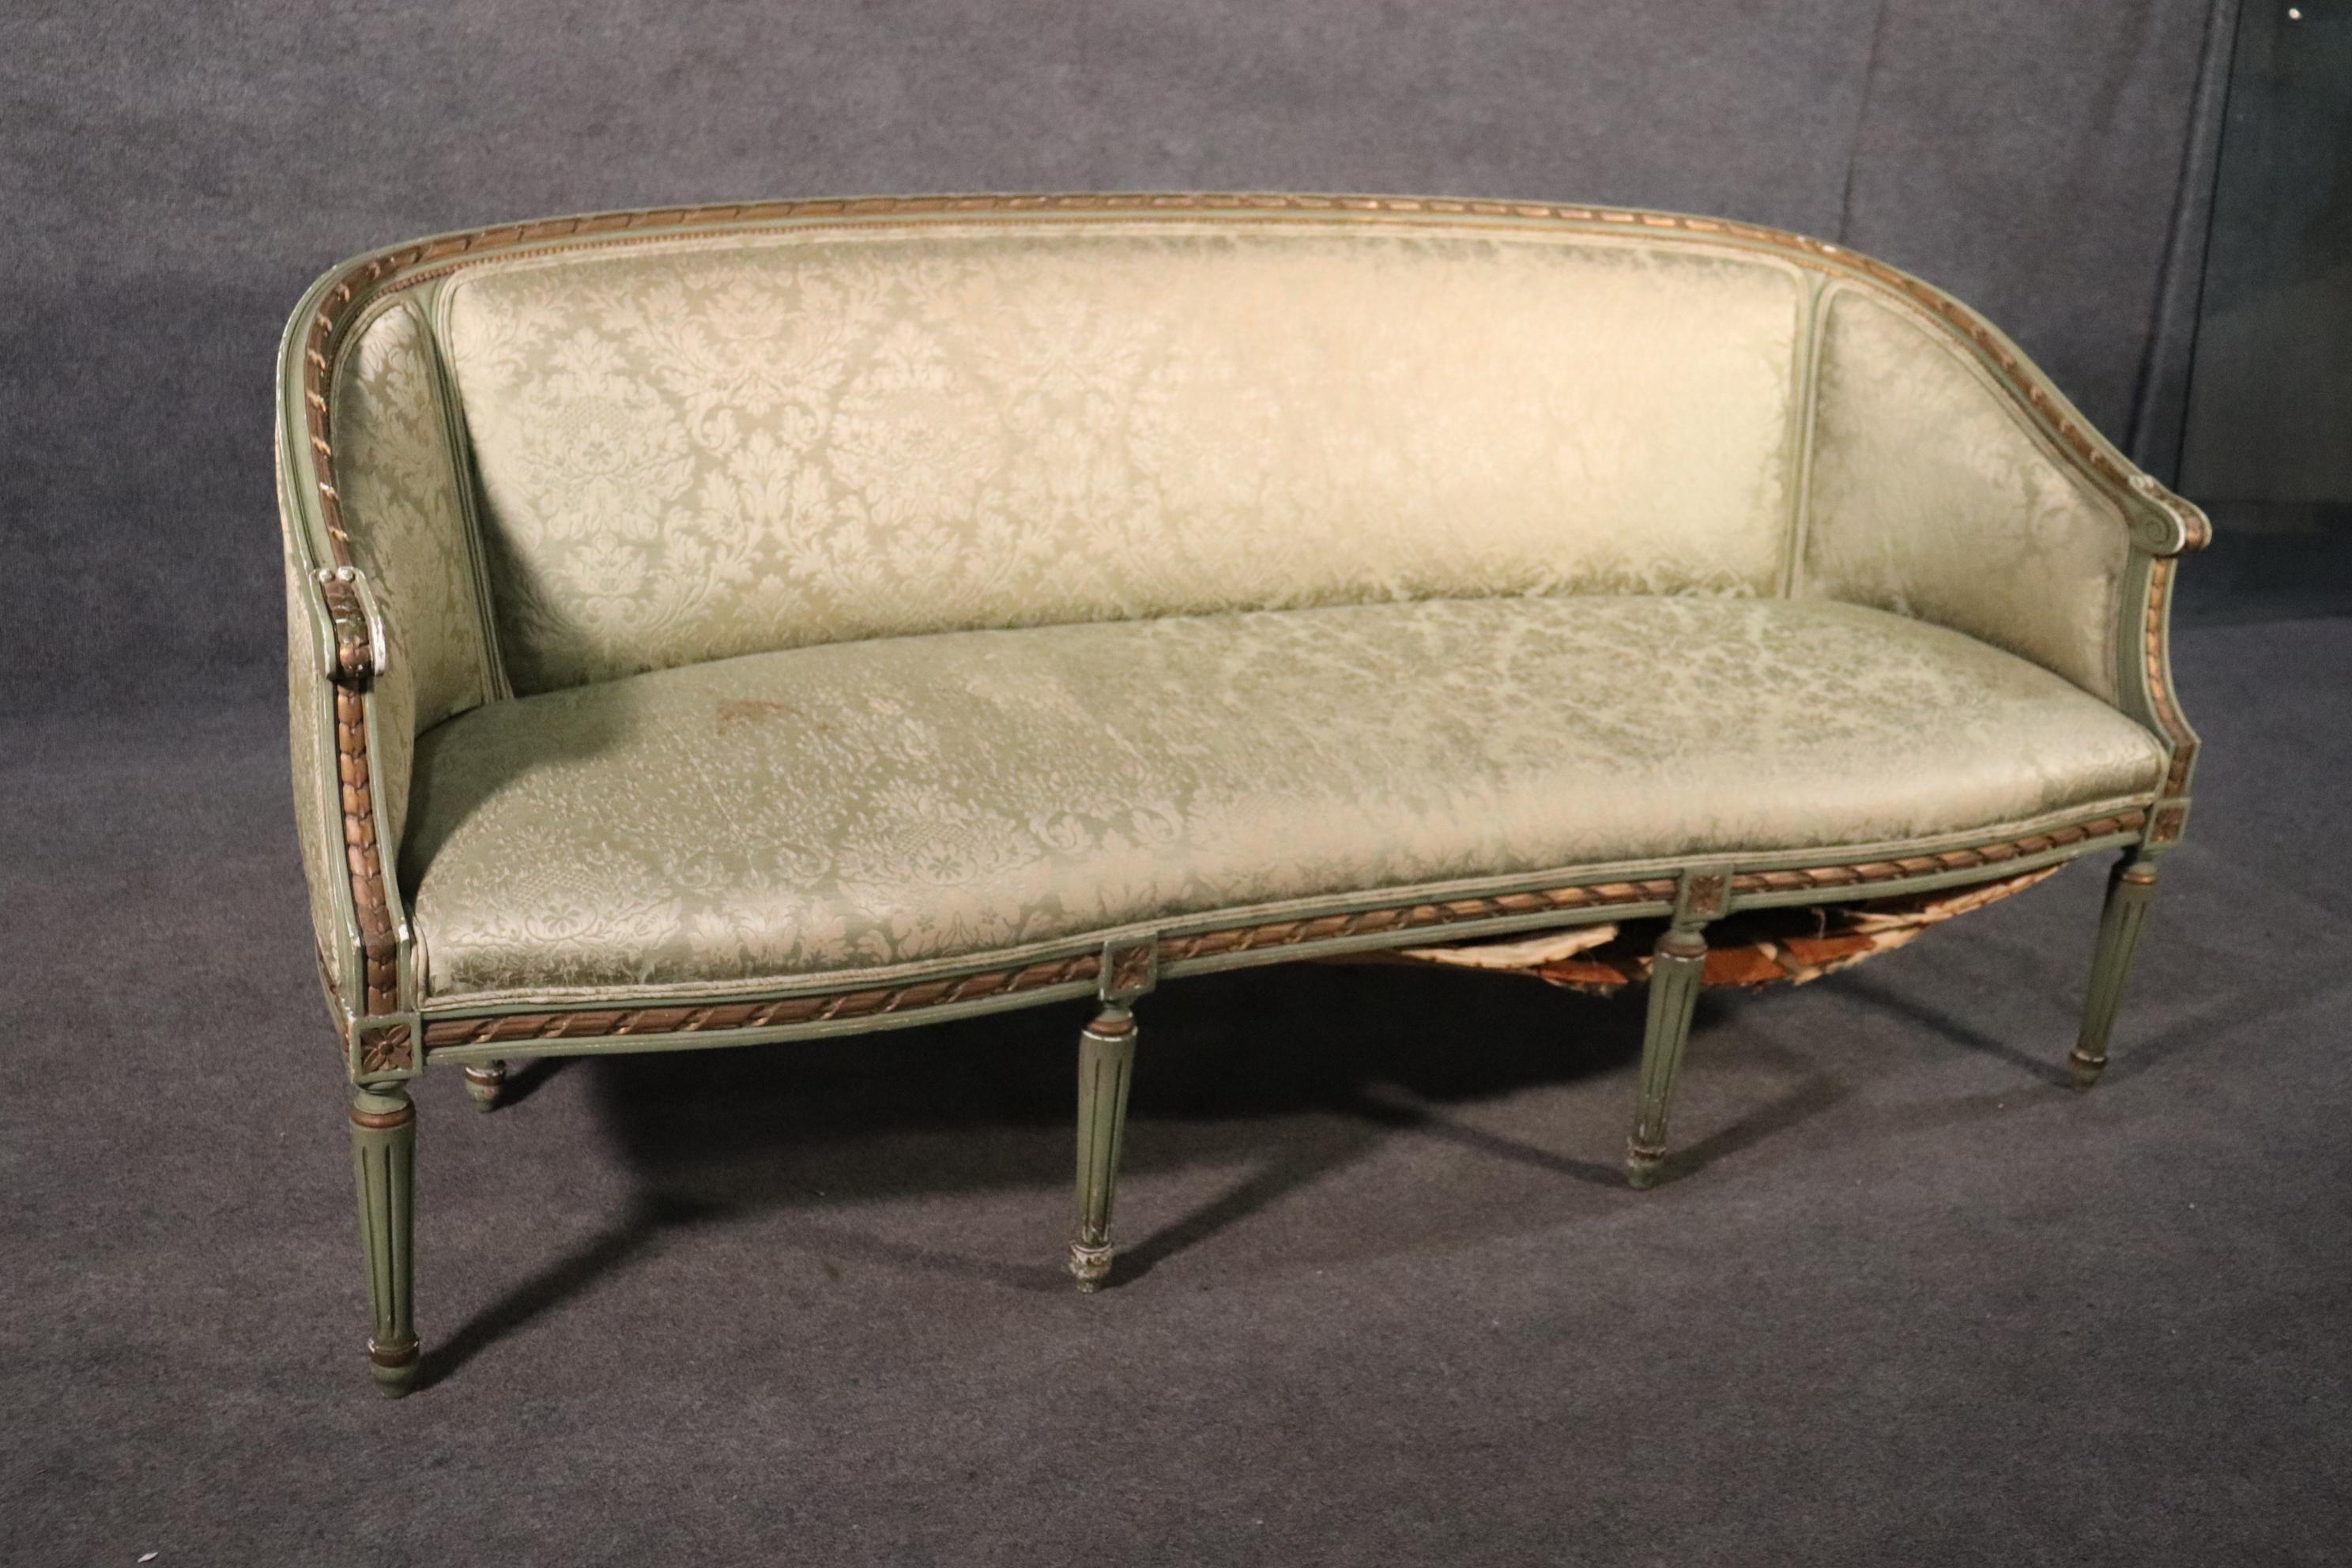 This is a gorgeous carved Louis XVI settee with a great painted and gilded carved frame. The settee features its original paint and damask upholstery which is vintage and does have some minor staining which may be able to be cleaned. The burlap base